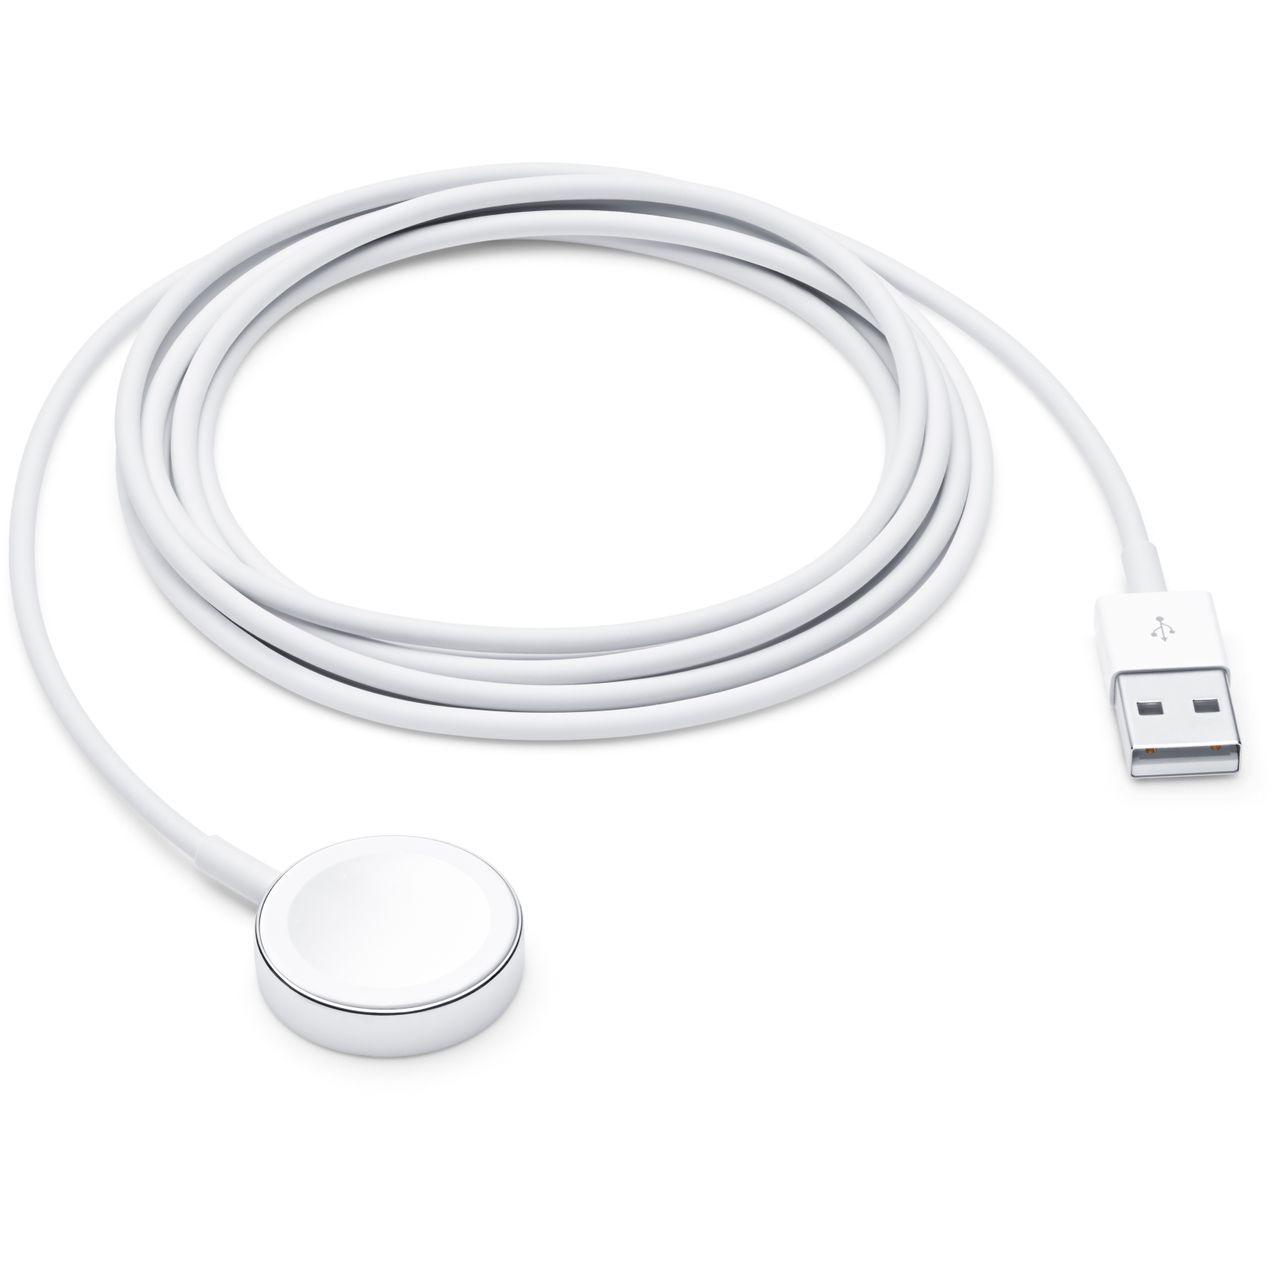 Apple Magnetic Charging Cable (2m) Review